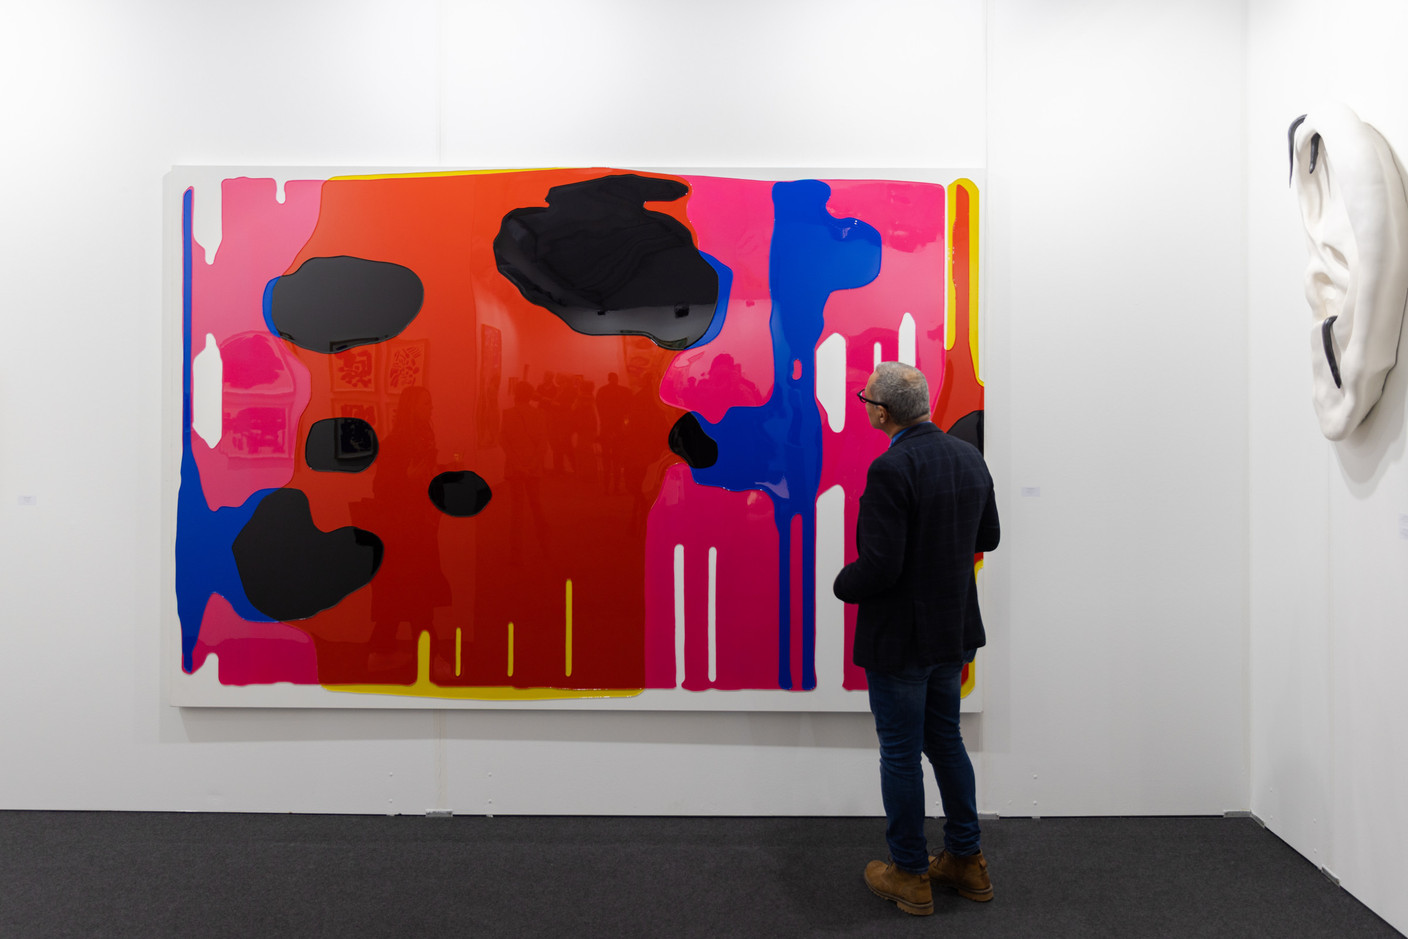 The Nosbaum Reding gallery presents a large-format work by Peter Zimmermann.  (Photo: Romain Gamba/Maison Moderne)